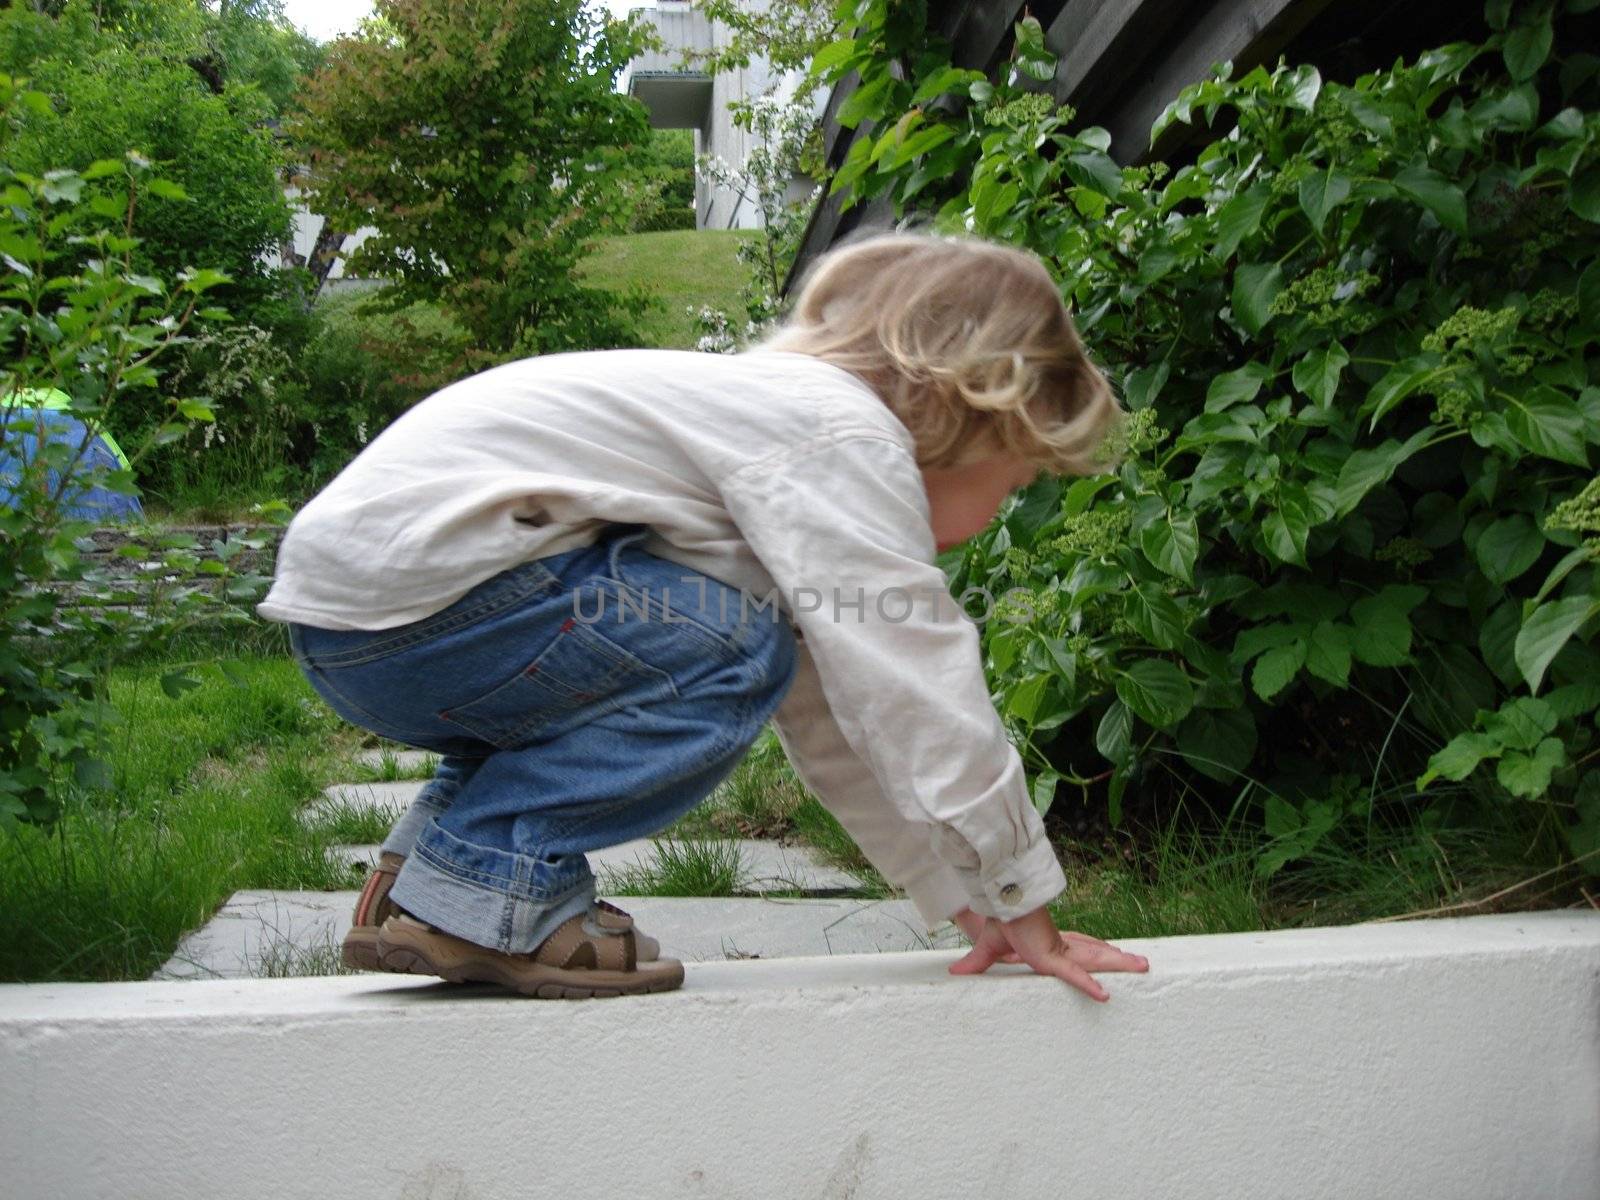 girl climbing on the wall. Please note: No negative use allowed.